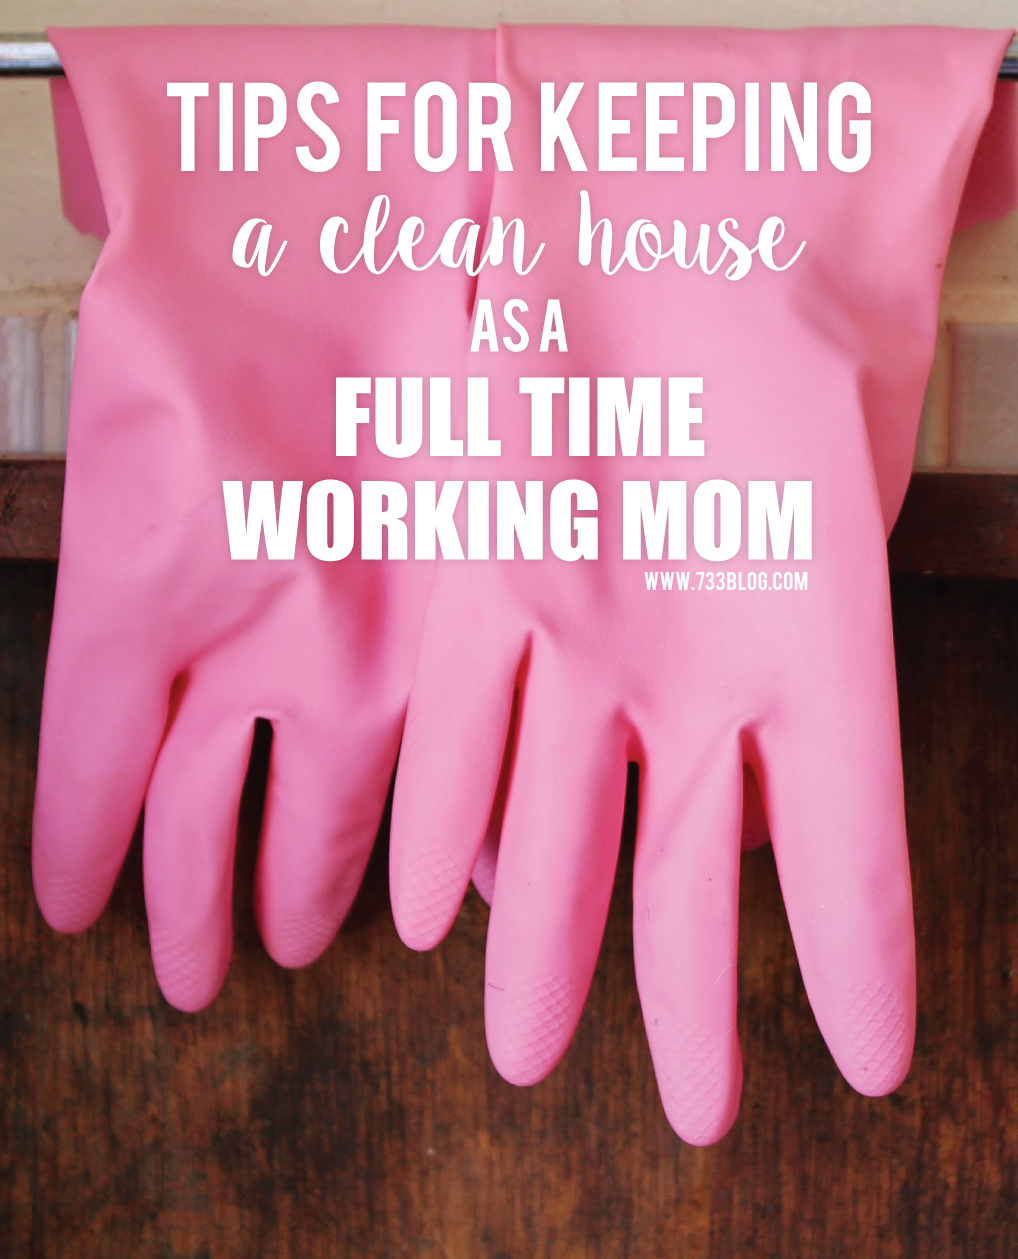 How to Keep your House Clean while Working a Full Time Job